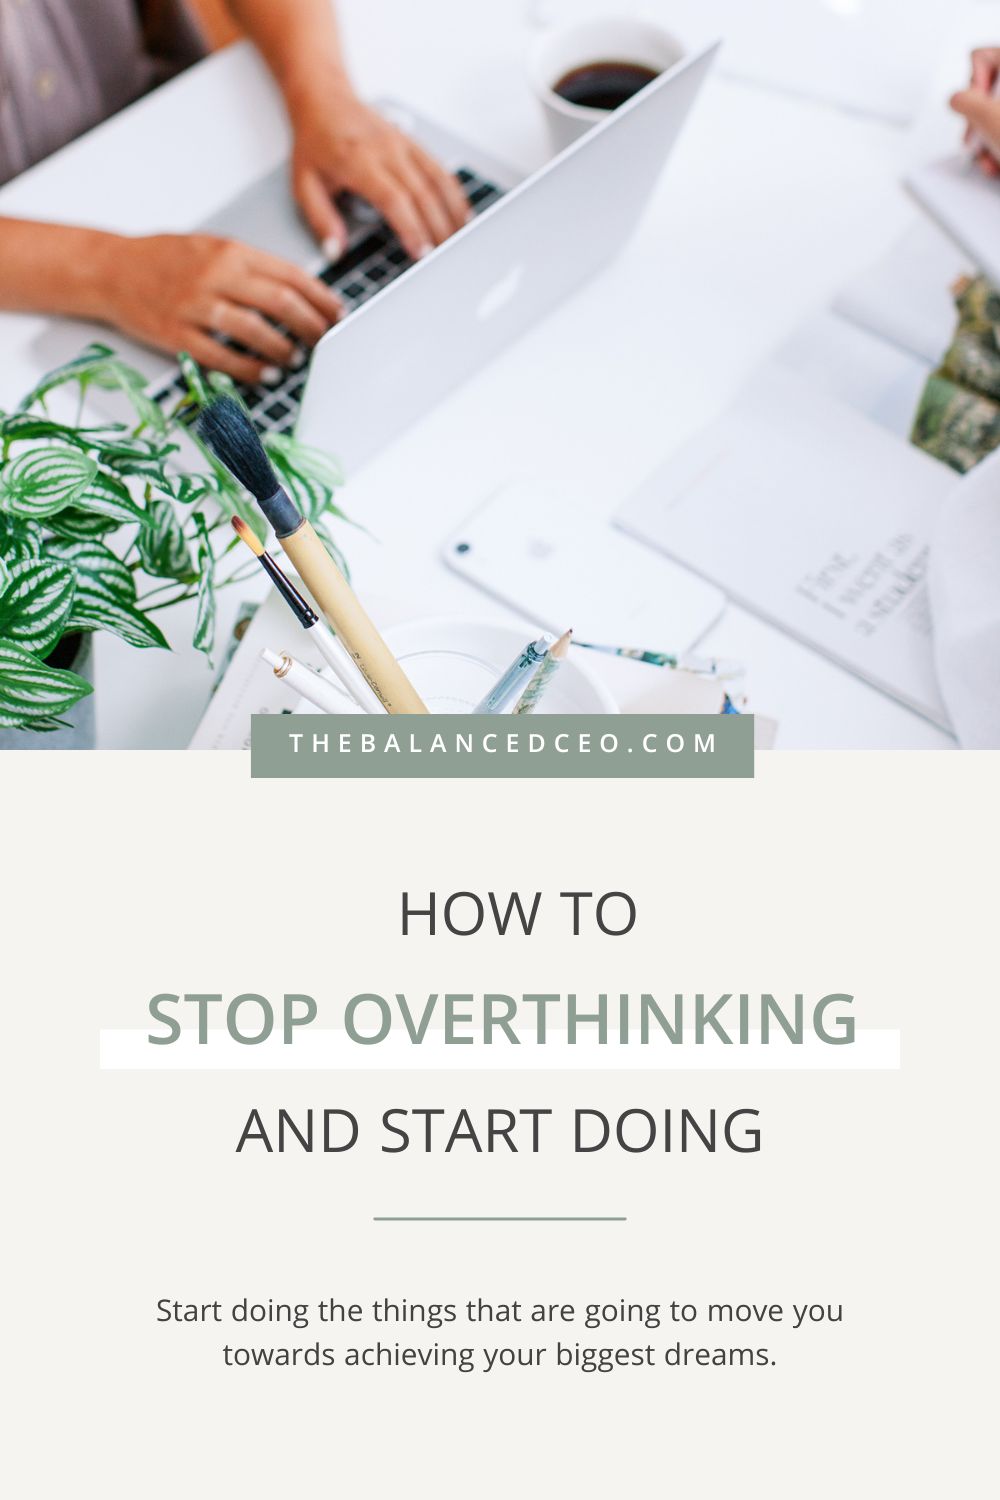 How to Stop Overthinking and Start Doing